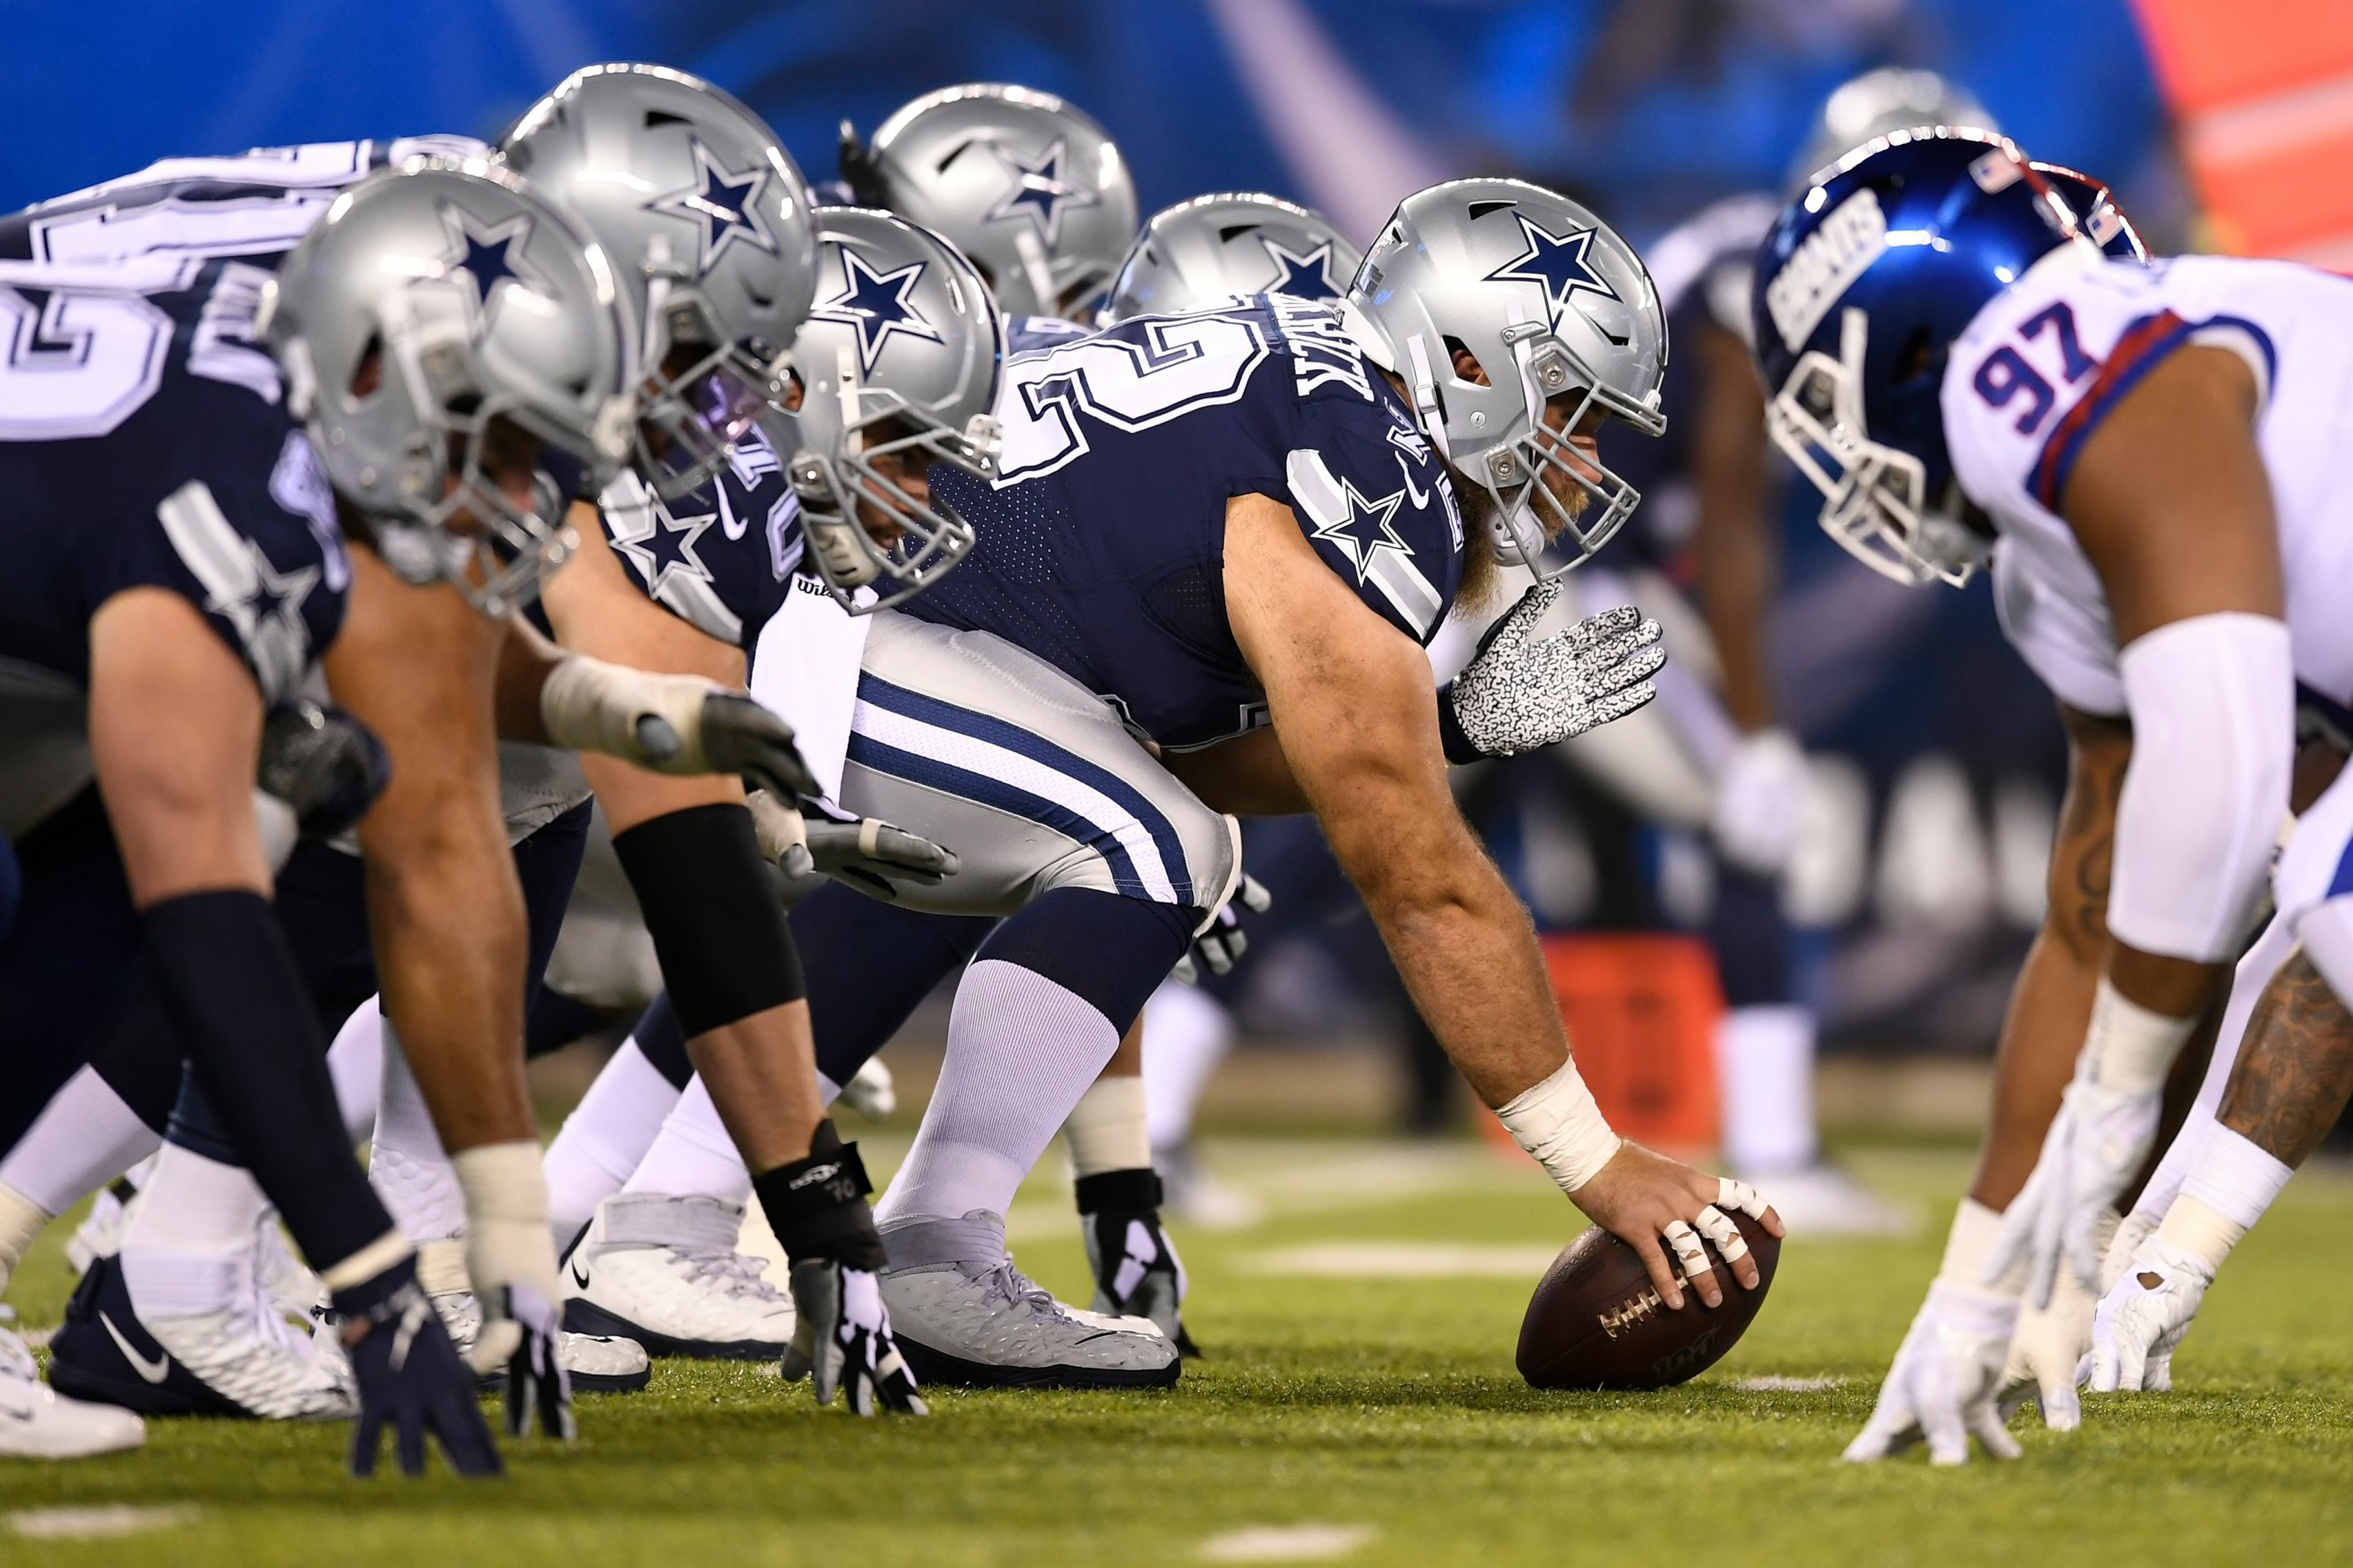 Dallas Cowboys Draft 5 Interior Offensive Linemen for 5 Rounds